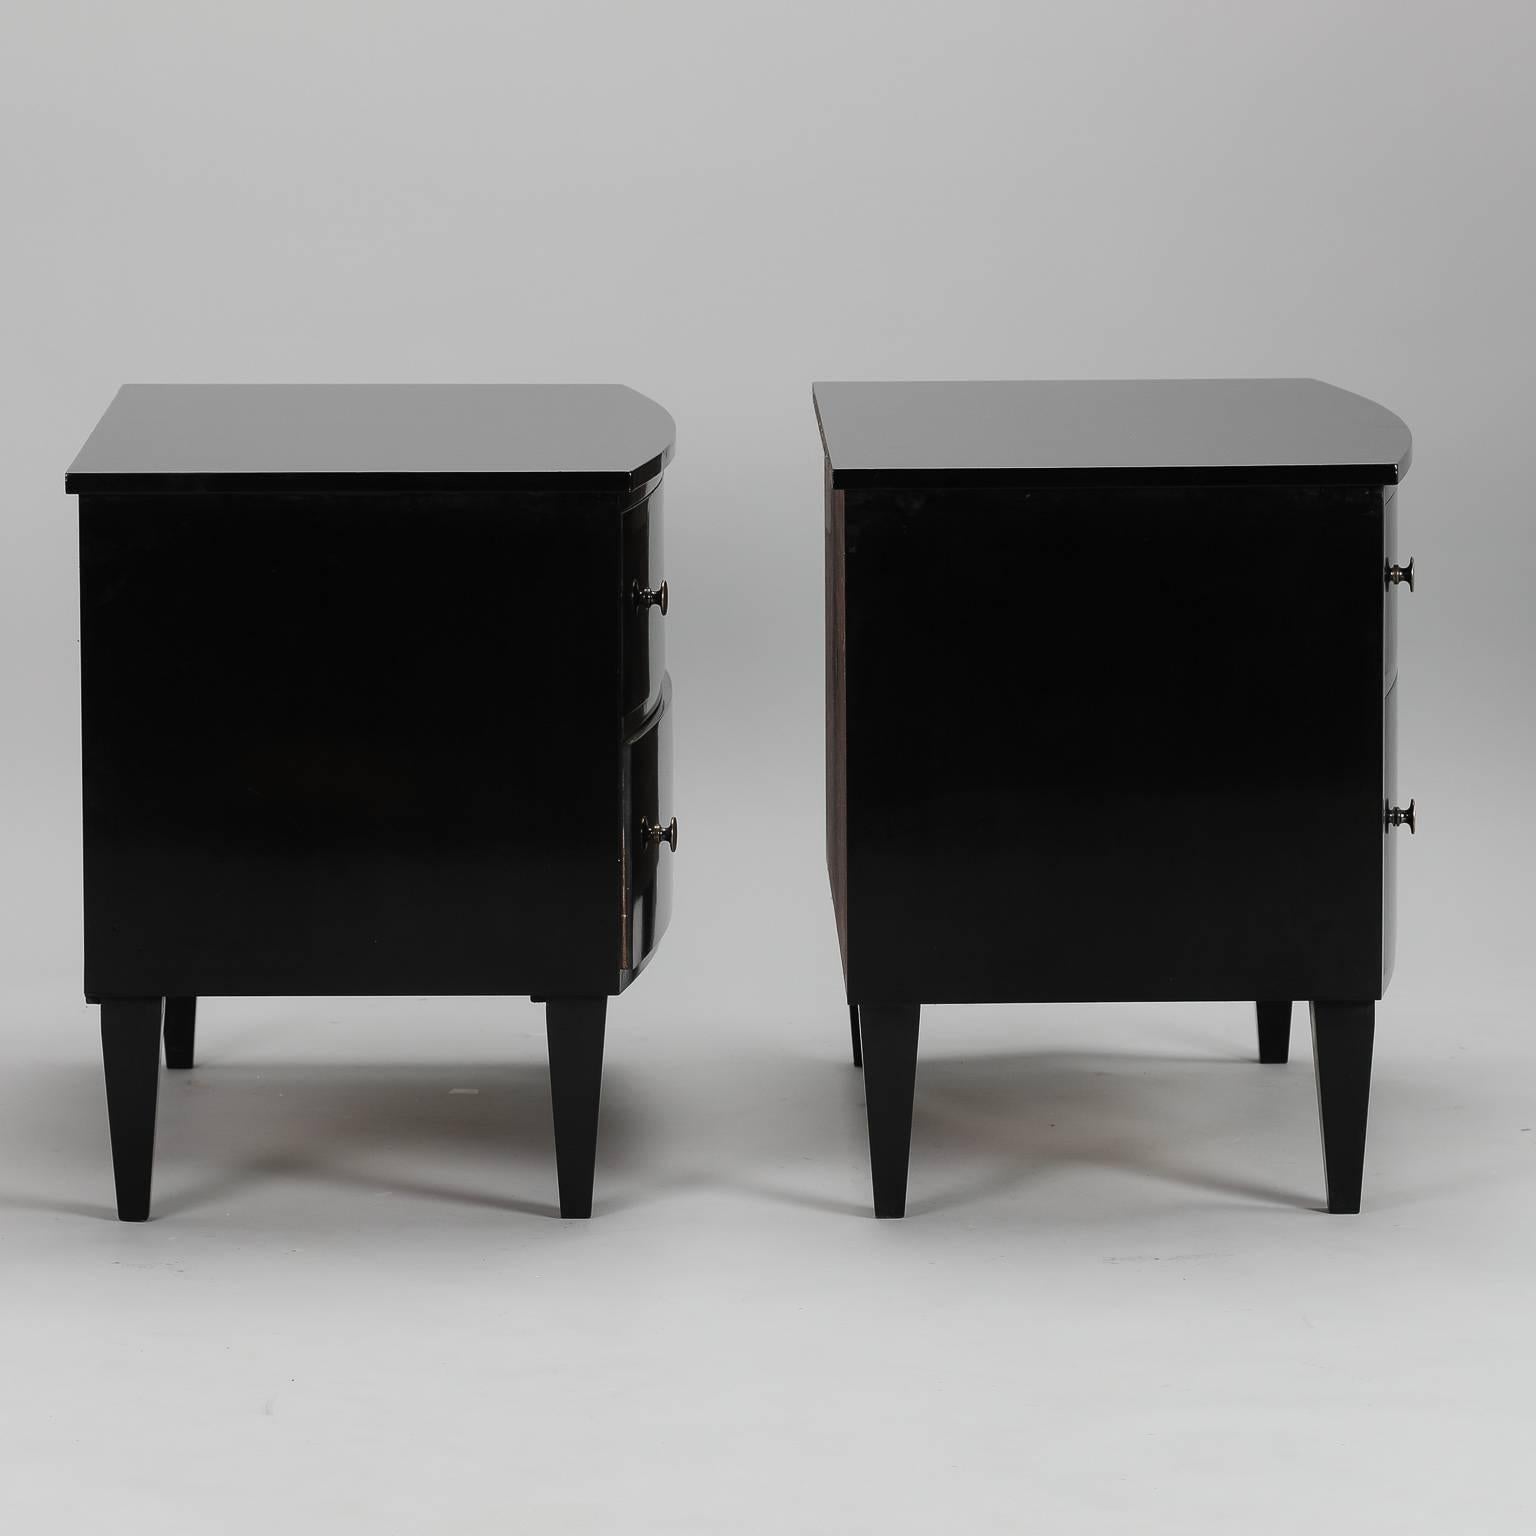 Pair of two-drawer chests with new ebonized finish, brass finish and inlaid bone escutcheons. With their versatile size, these chests can flank a sofa or serve as nightstands. Sold and priced as a pair.